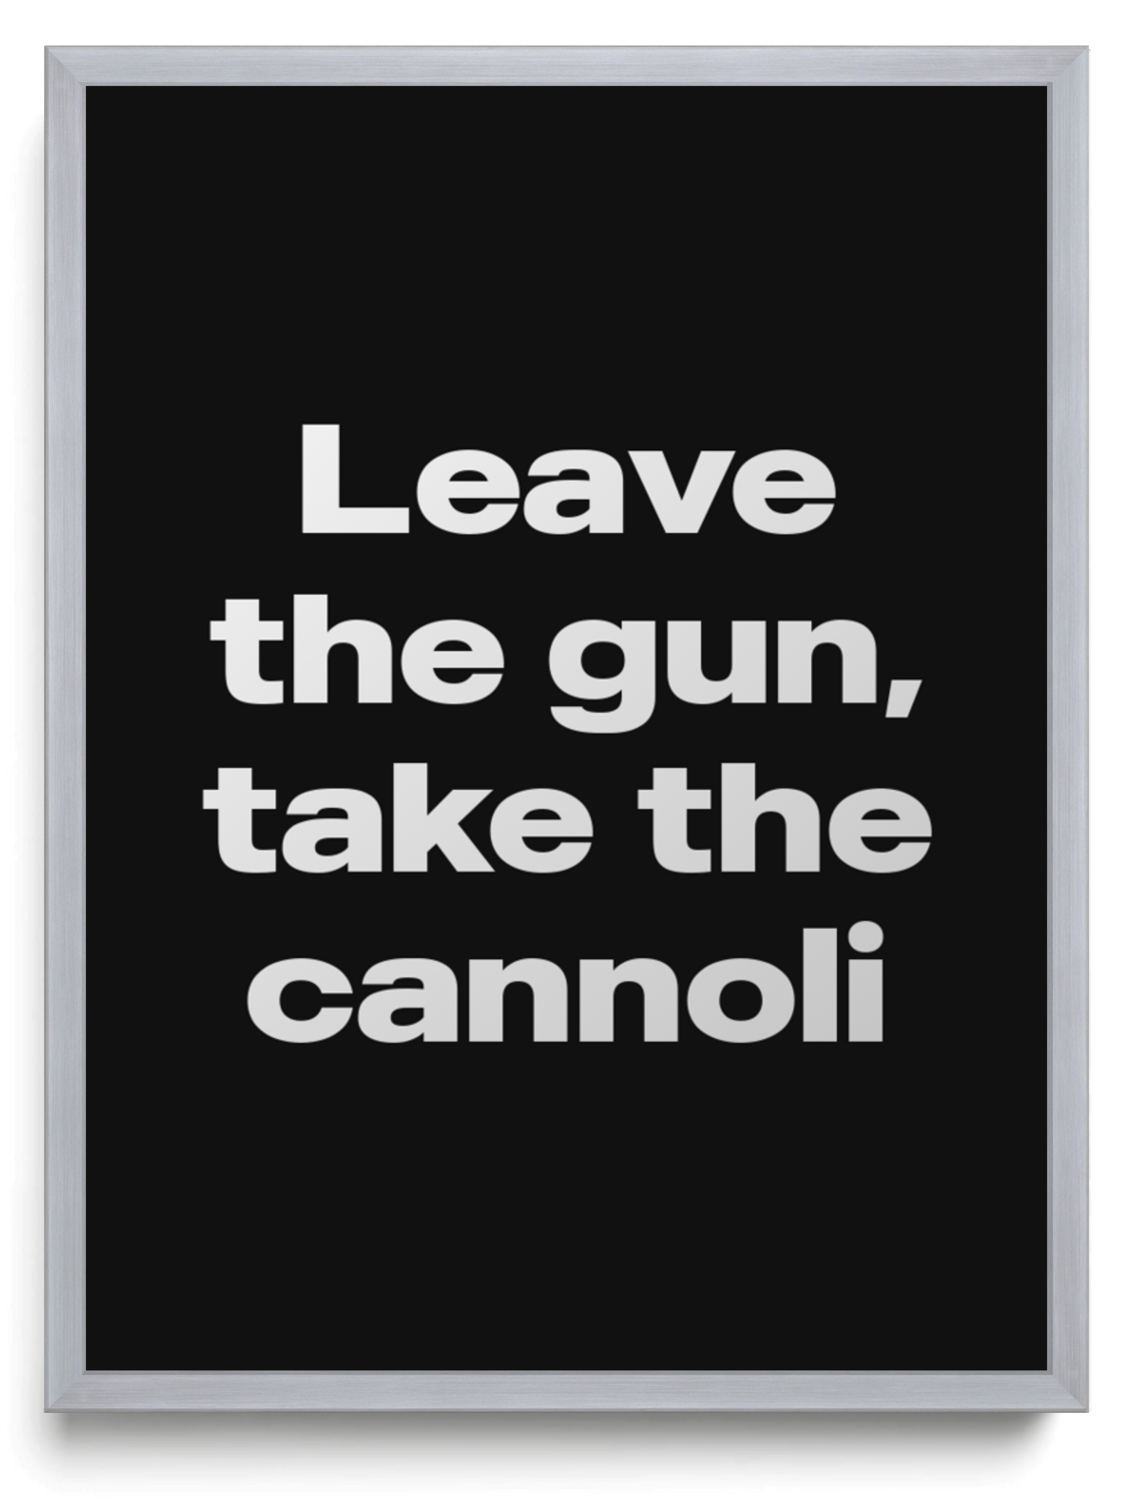 Leave the gun, take the cannoli framed typographic print